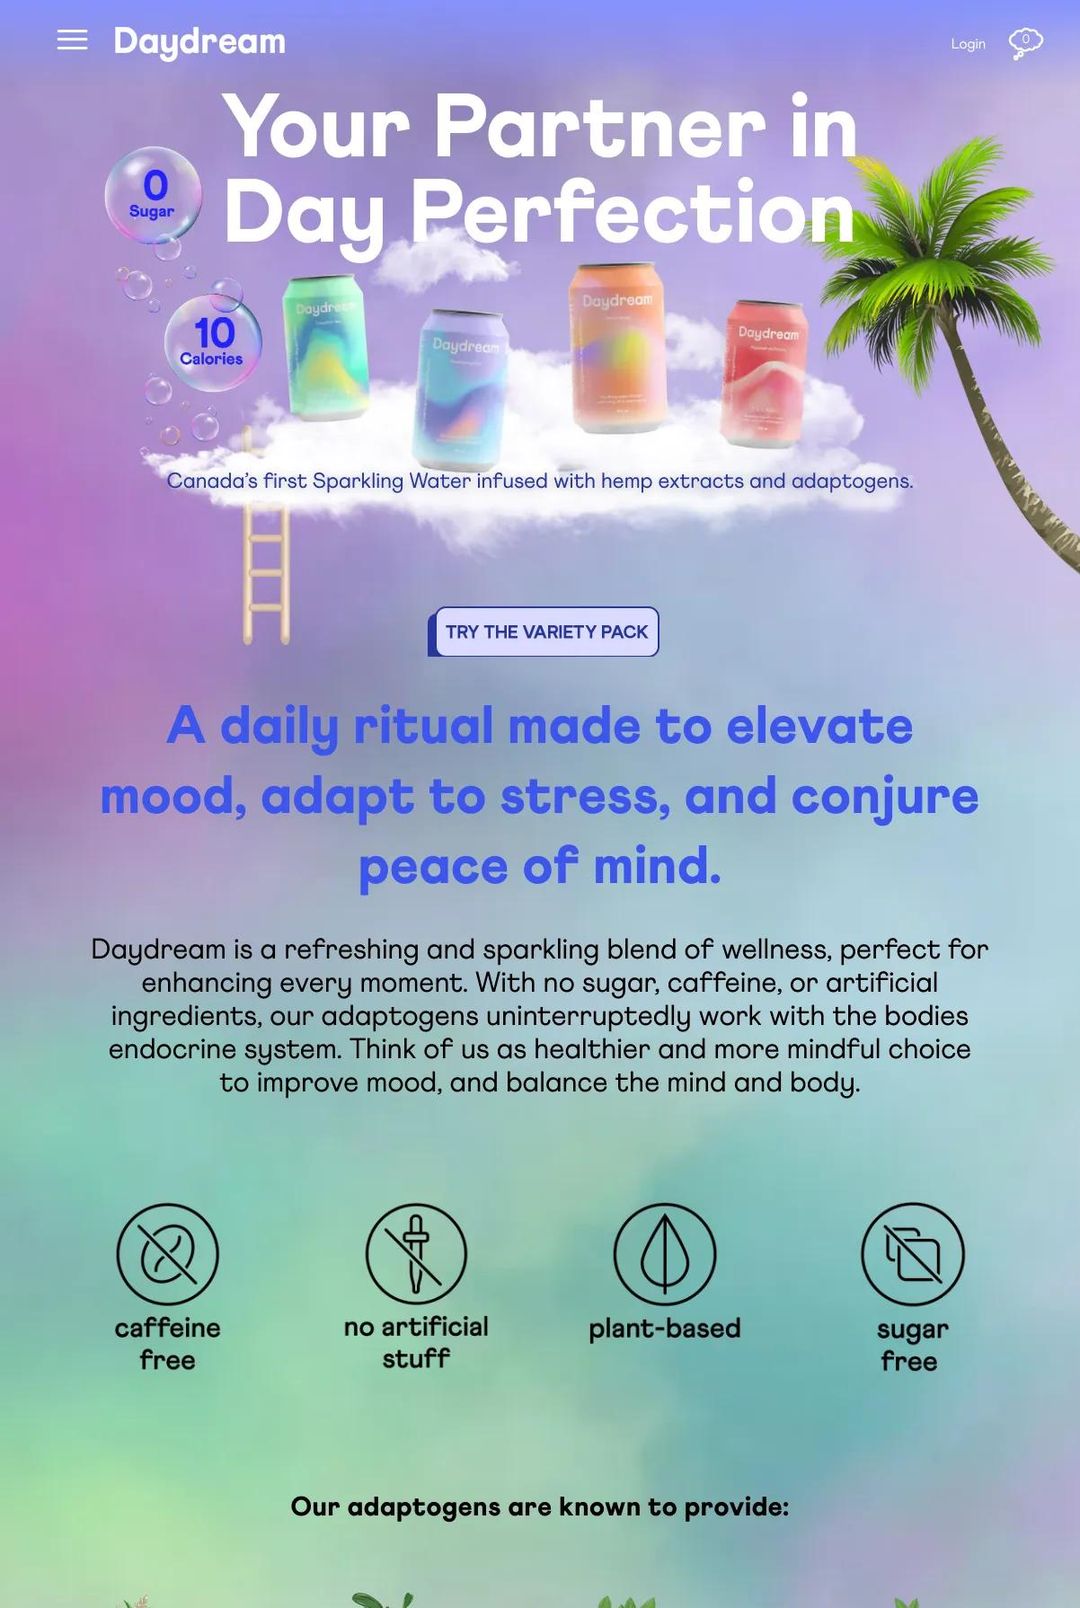 Screenshot 1 of Daydream Drinks (Example Shopify Food and Beverage Website)